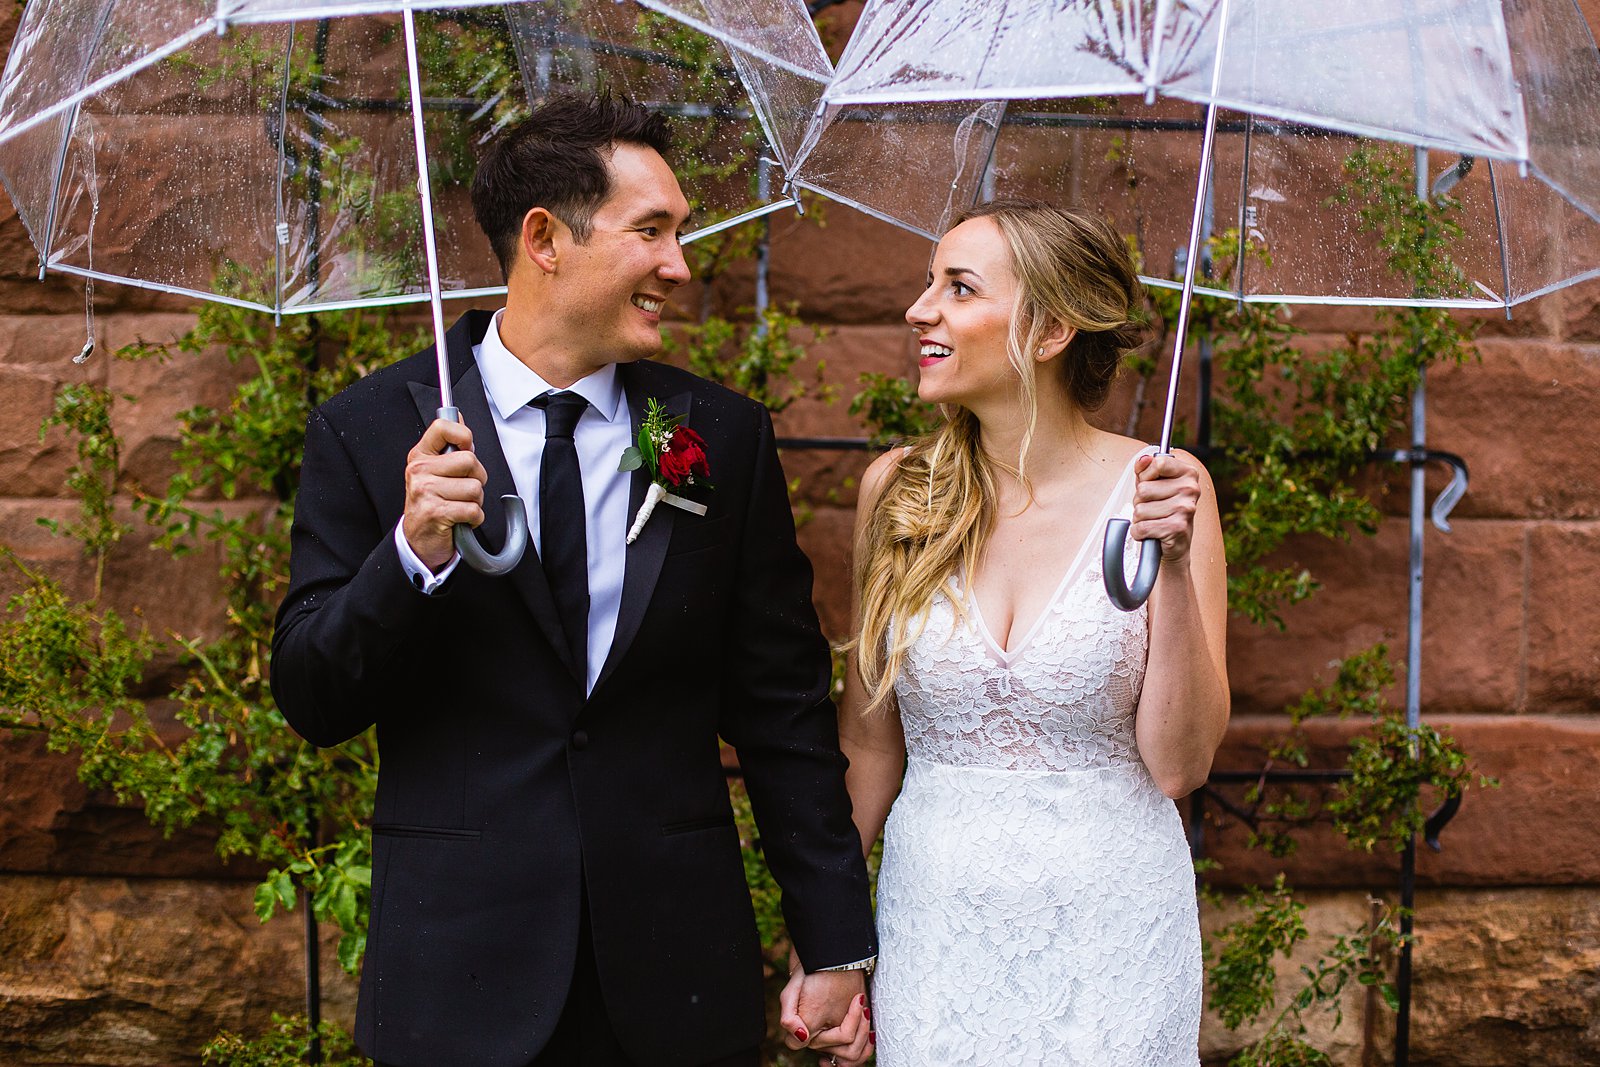 Bride and groom laughing together during their rainy Flagstaff Courthouse wedding by Flagstaff wedding photographer PMA Photography.